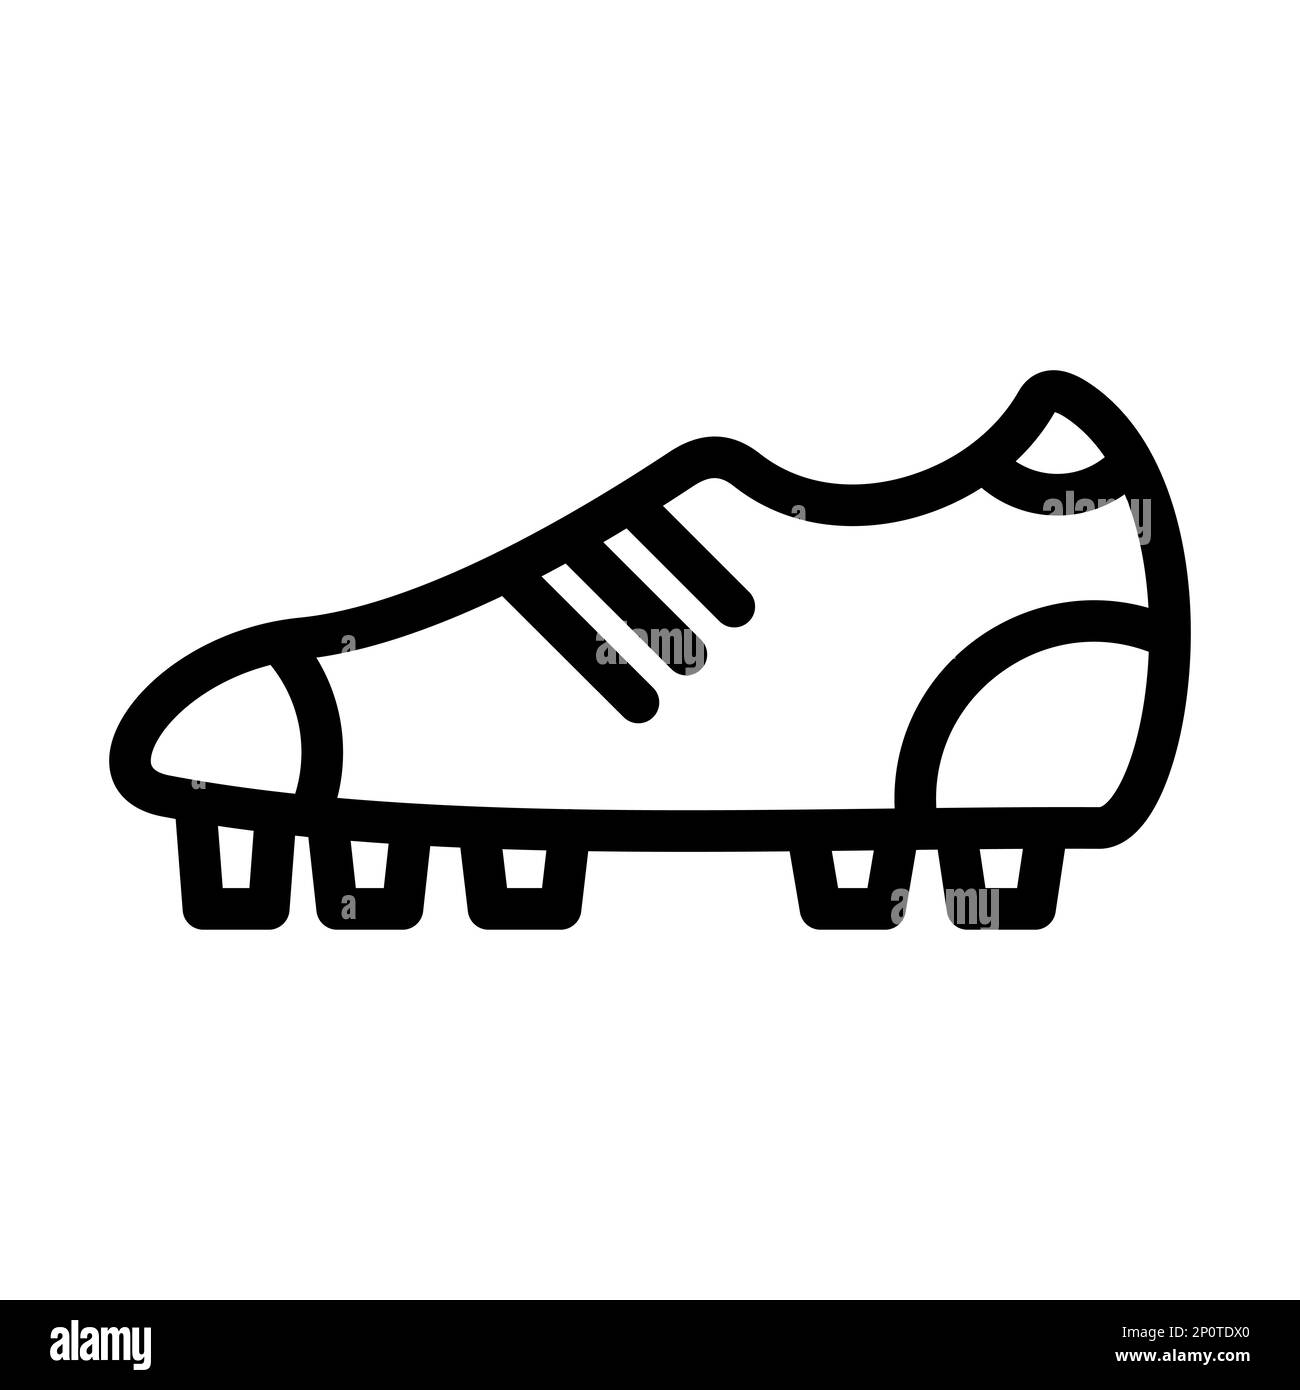 Football Boots Vector Thick Line Icon For Personal And Commercial Use. Stock Photo